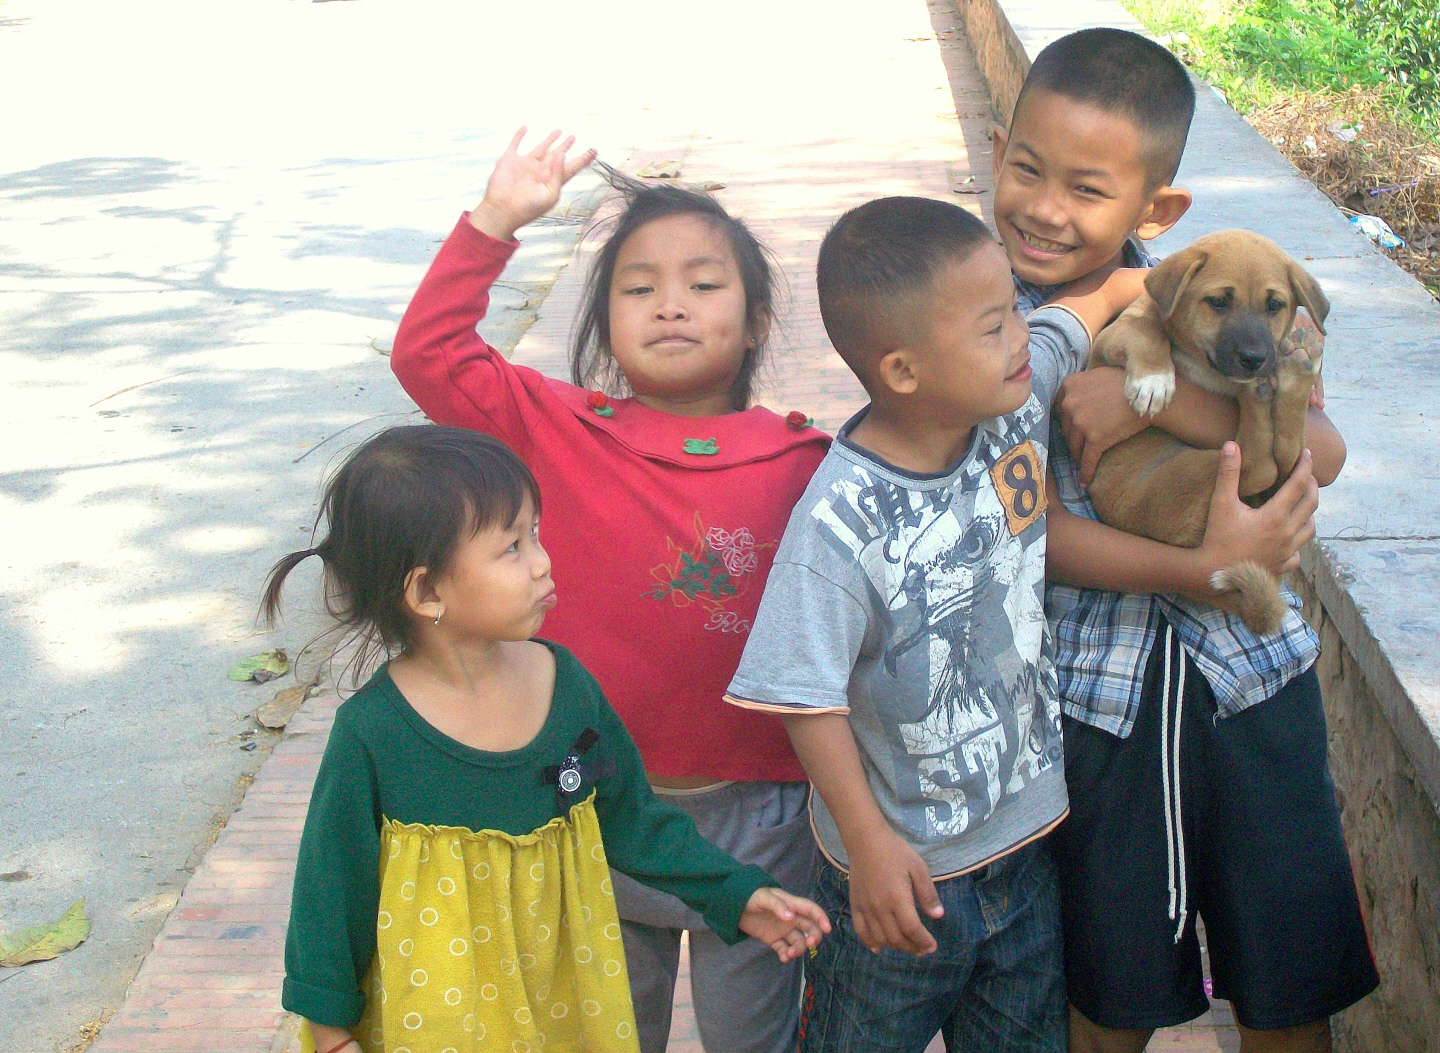 Children with New Friend - Luang Prabang, Laos